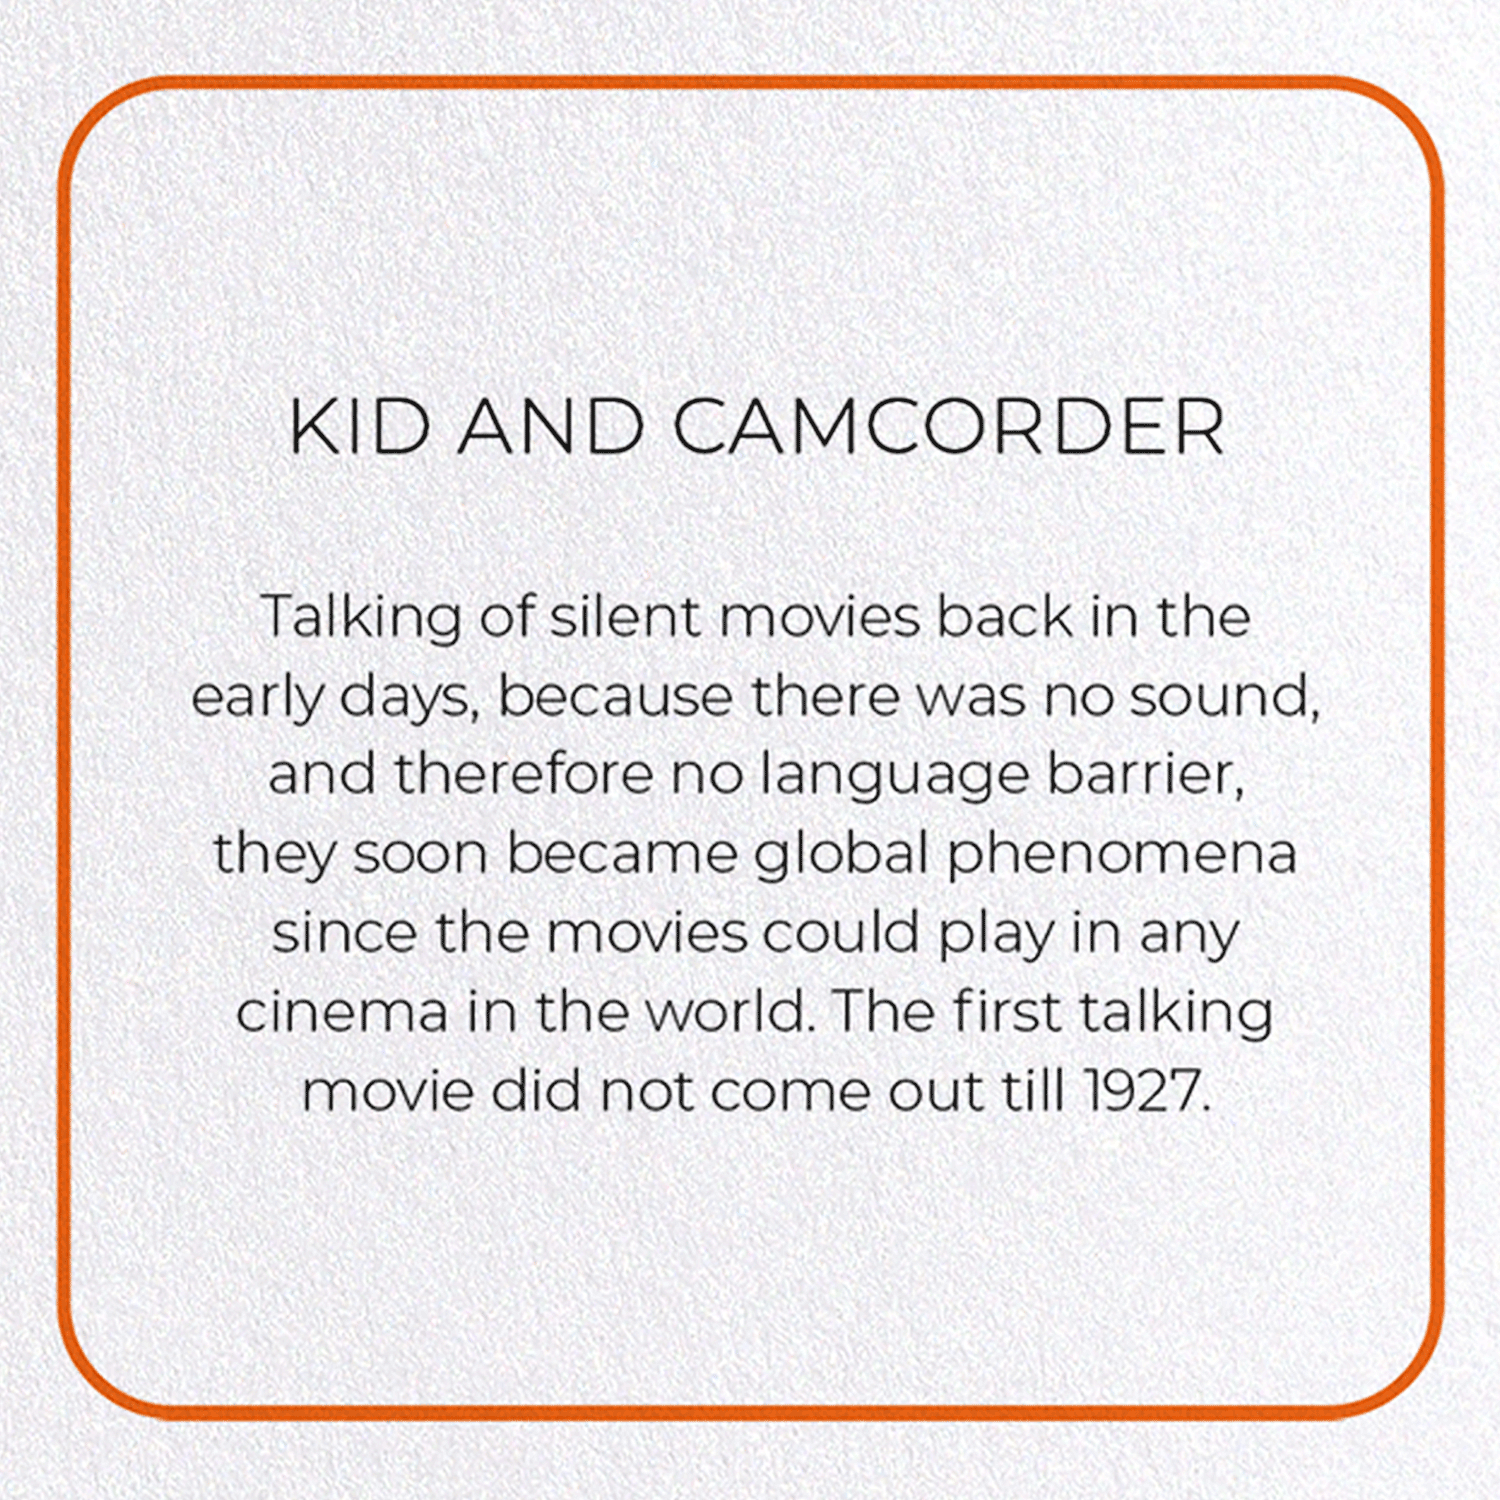 KID AND CAMCORDER: Photo Greeting Card